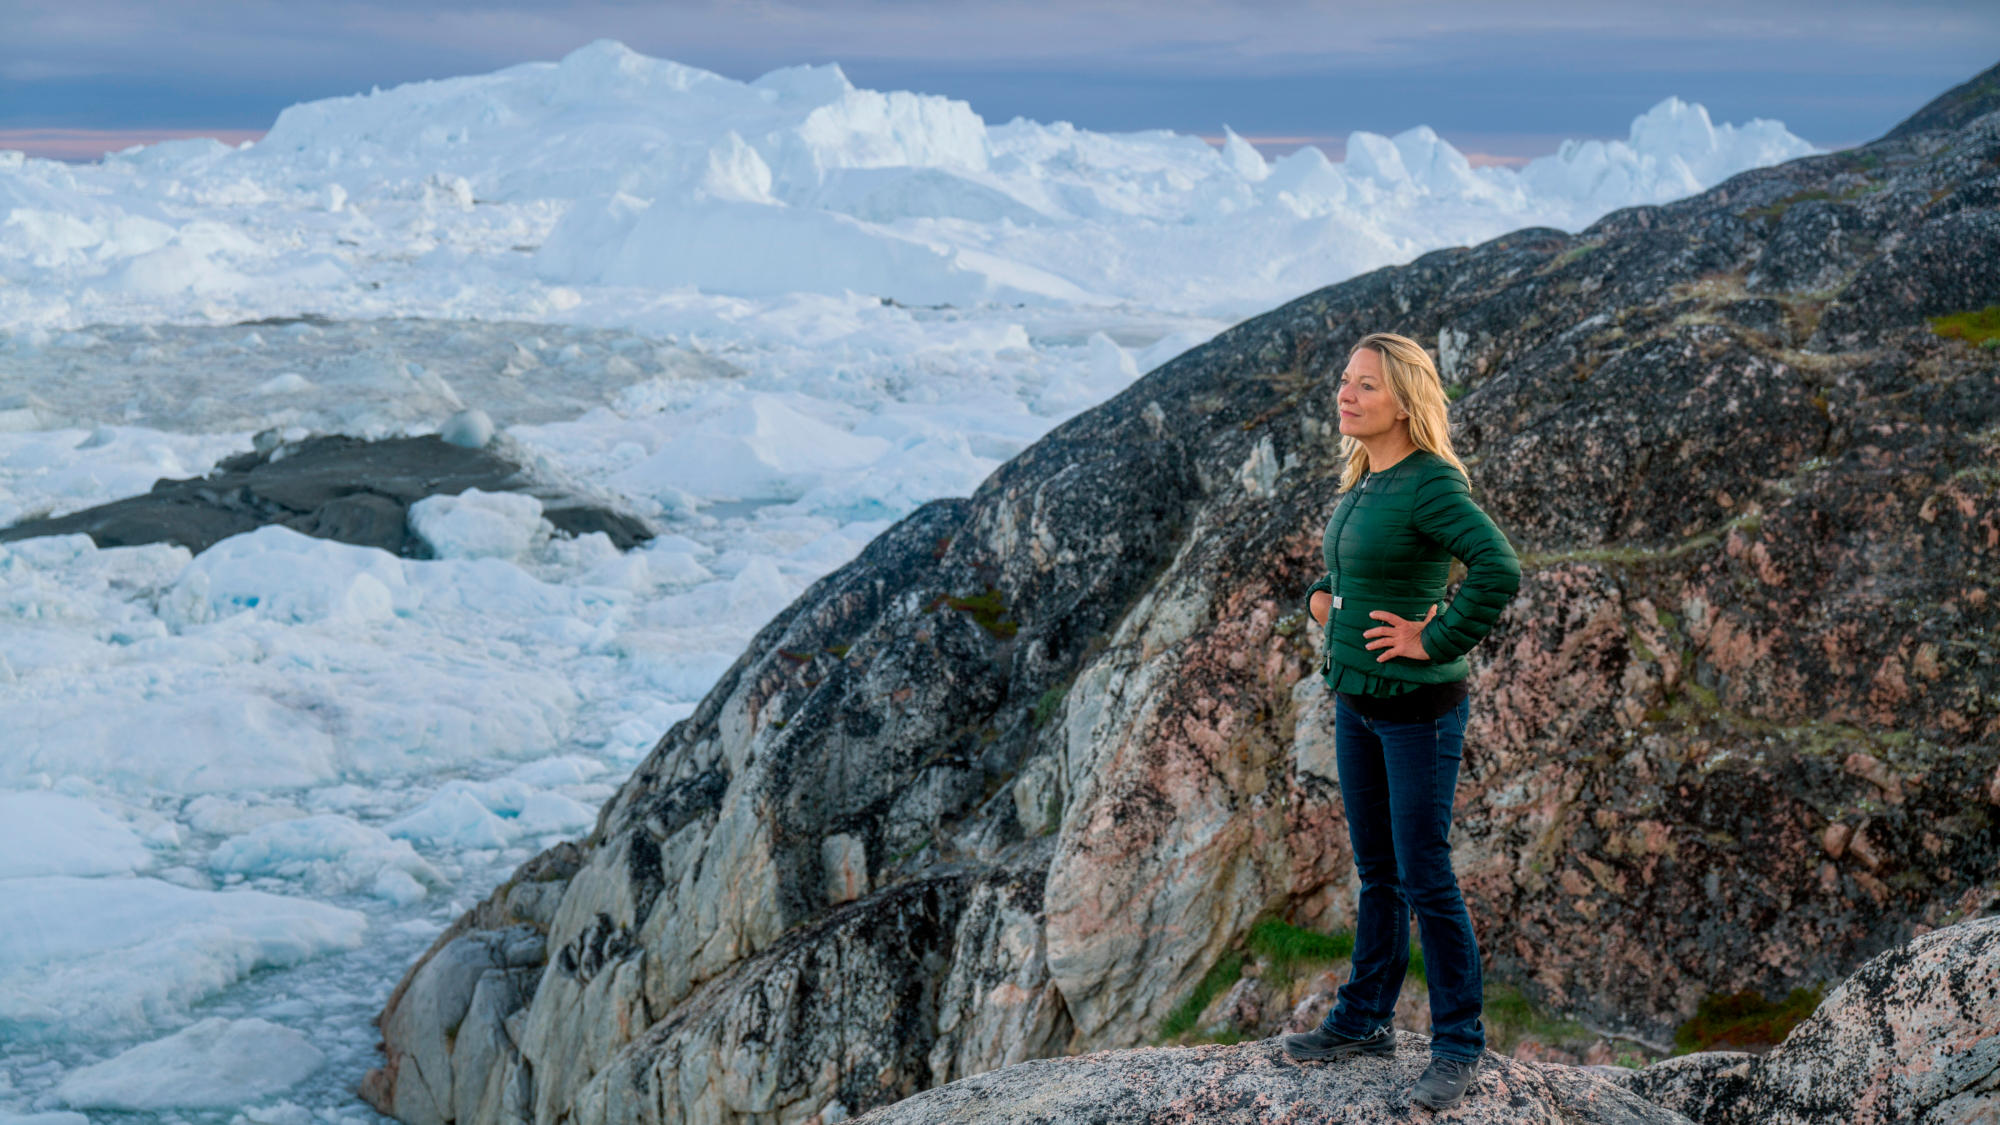 Antje Boetius stands on a rock, looking out over the surrounding icy landscape